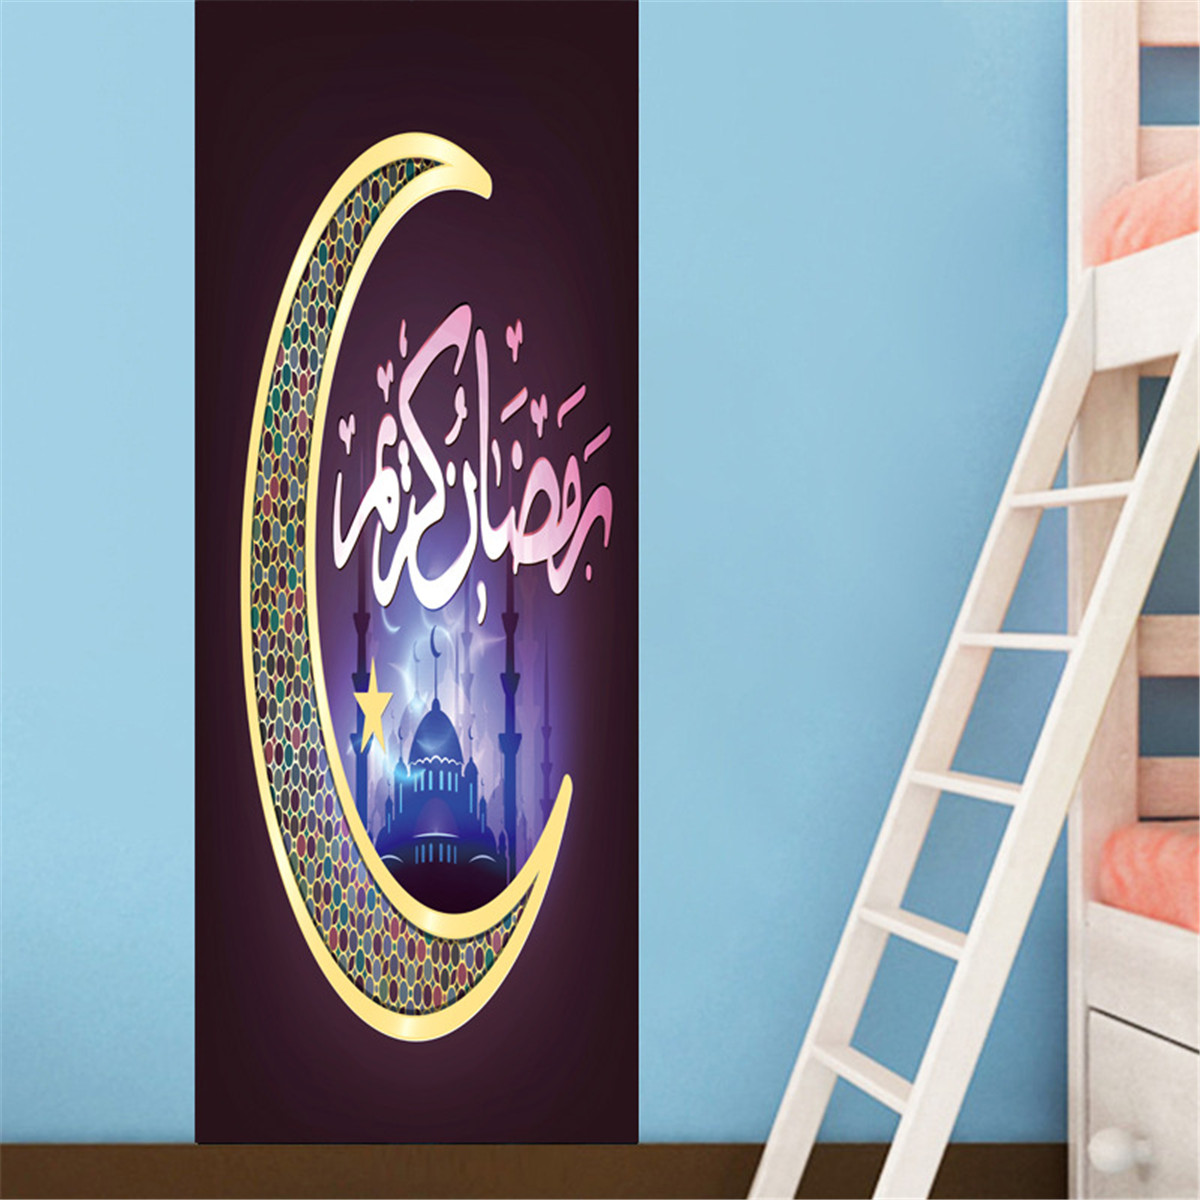 3D-Islamic-Wall-Sticker-Door-Wall-Paper-Removable-Wall-Decal-Office-Home-Living-Room-Bedroom-Decorat-1755284-4